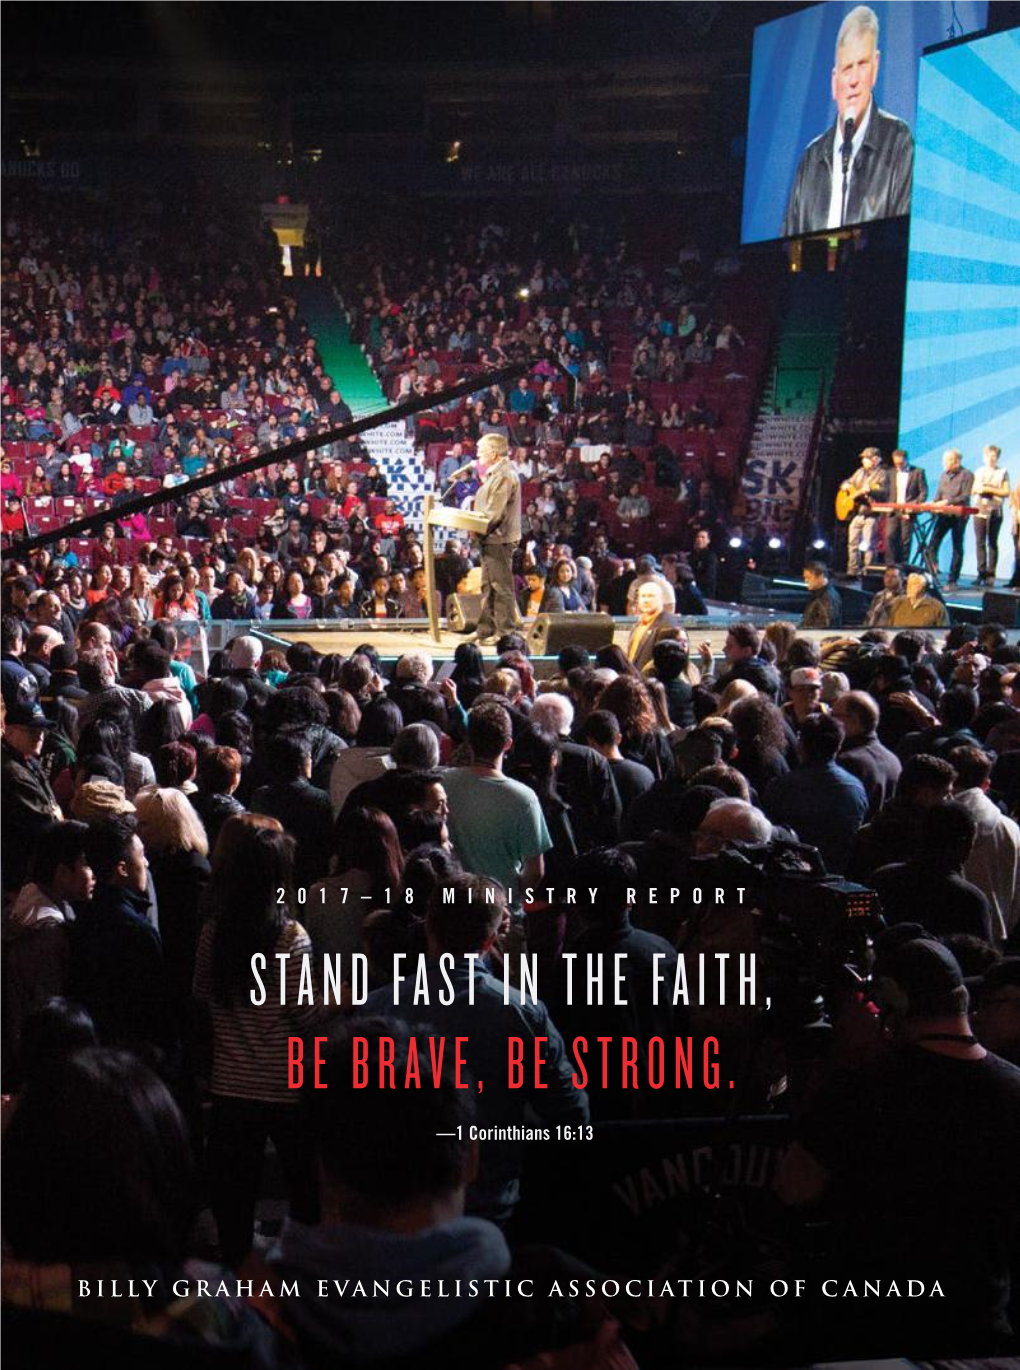 STAND FAST in the FAITH, BE BRAVE, BE STRONG. —1 Corinthians 16:13